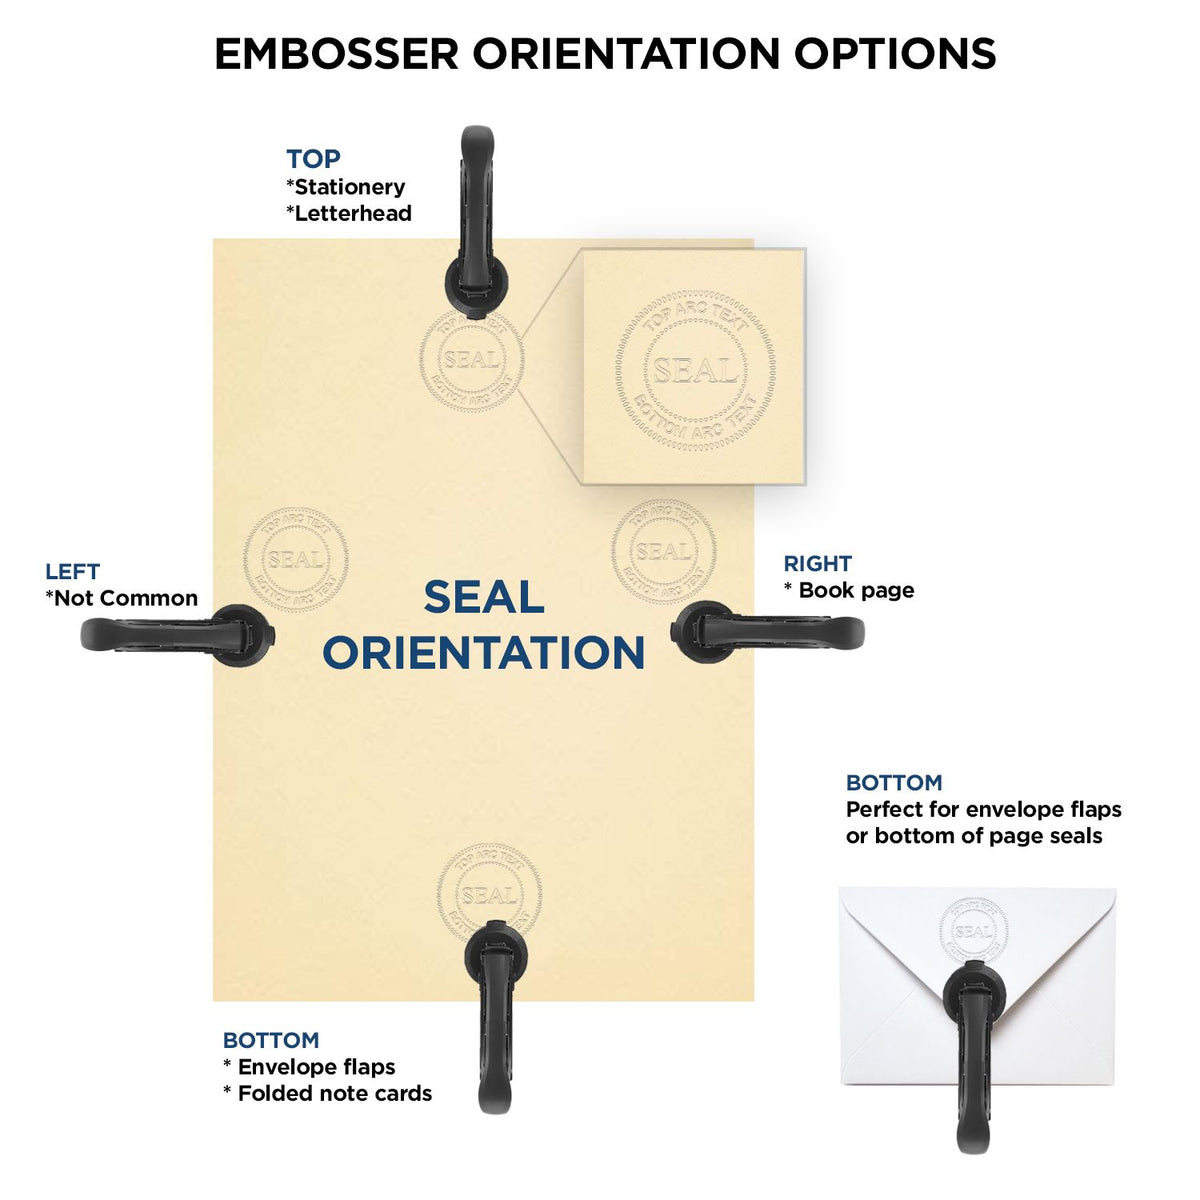 An infographic for the Hybrid Washington Engineer Seal showing embosser orientation, this is showing examples of a top, bottom, right and left insert.